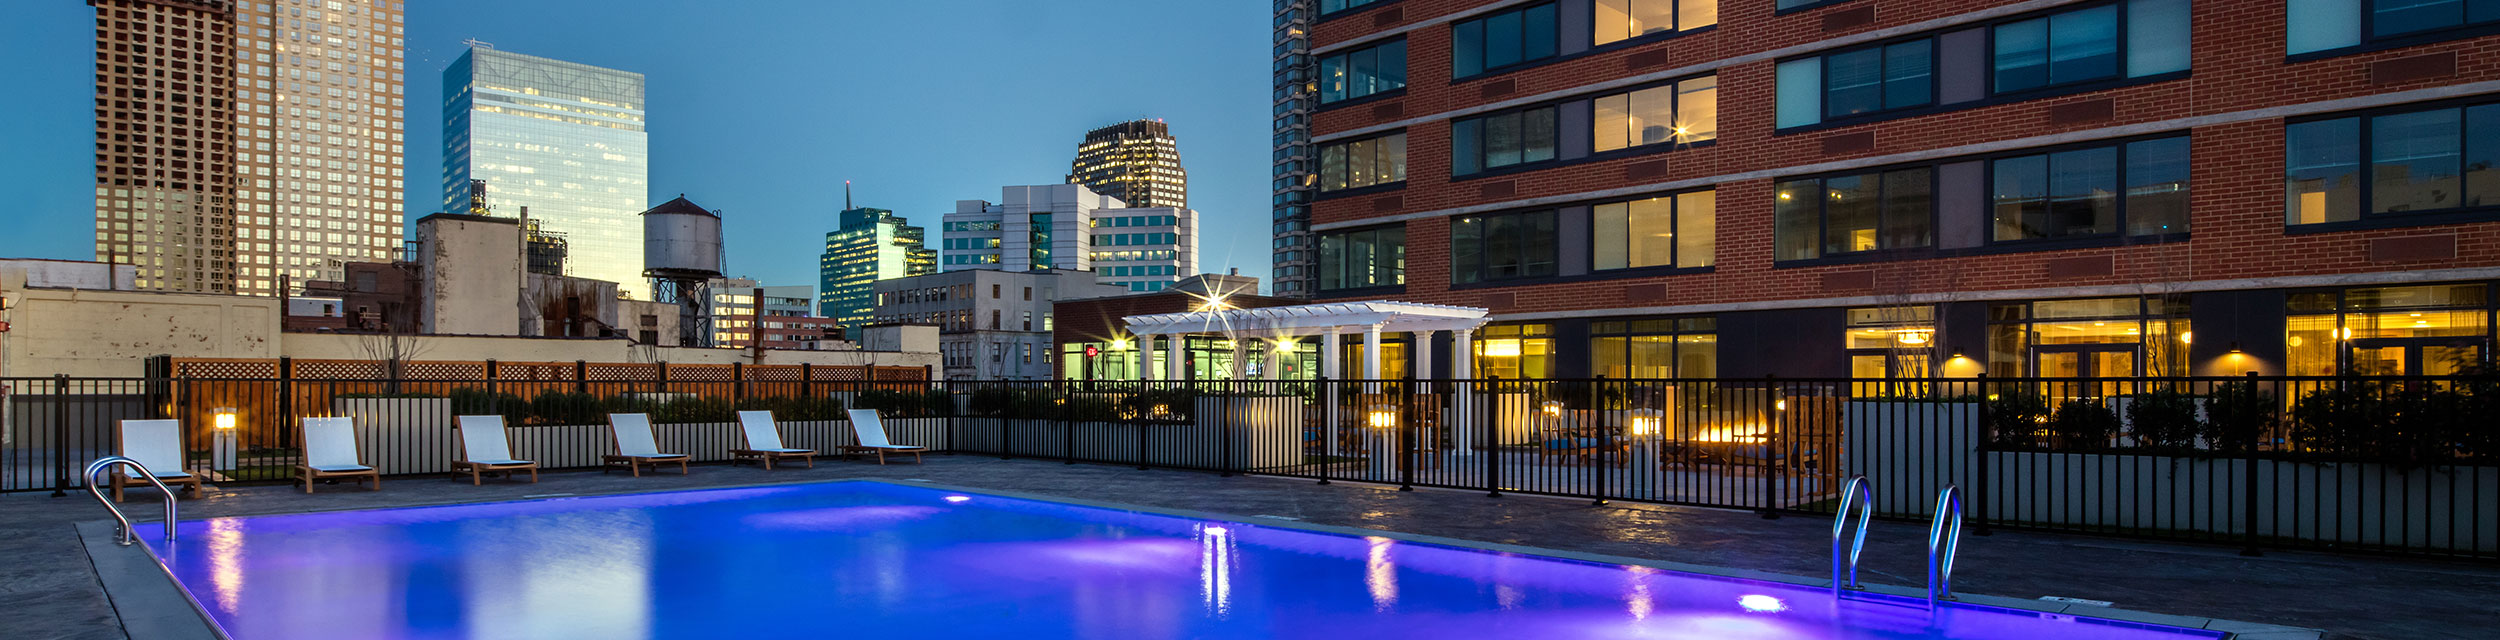 wide angle photo of the pool at The Morgan at Provost Square apartments